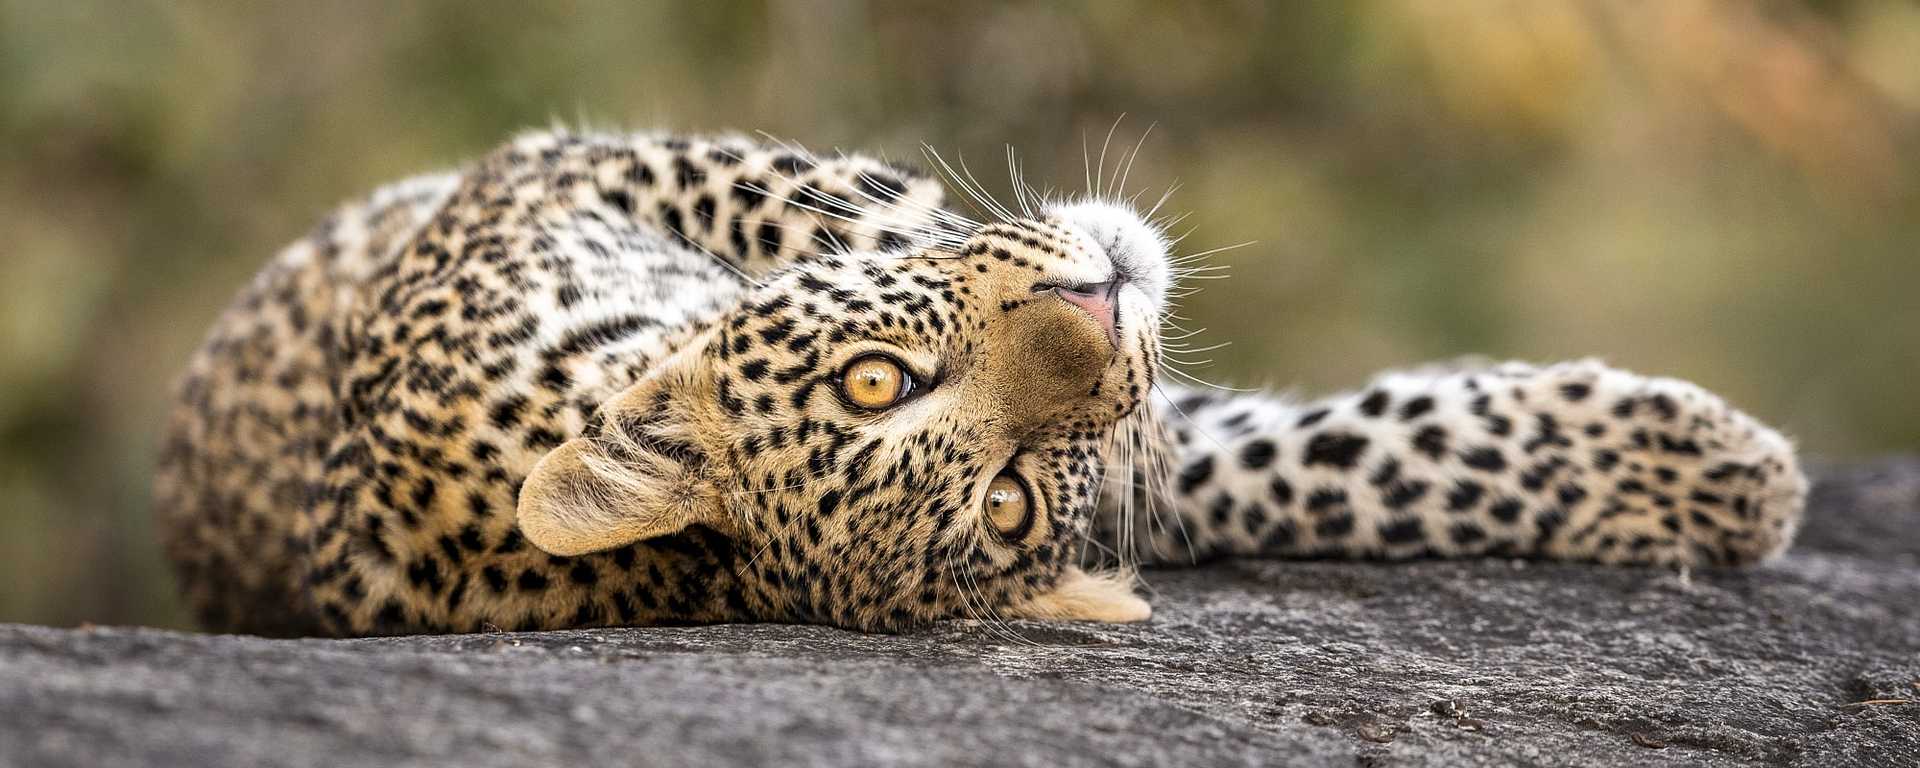 Playful leopard cub with big eyes lying on a rock in Kruger National Park, South Africa